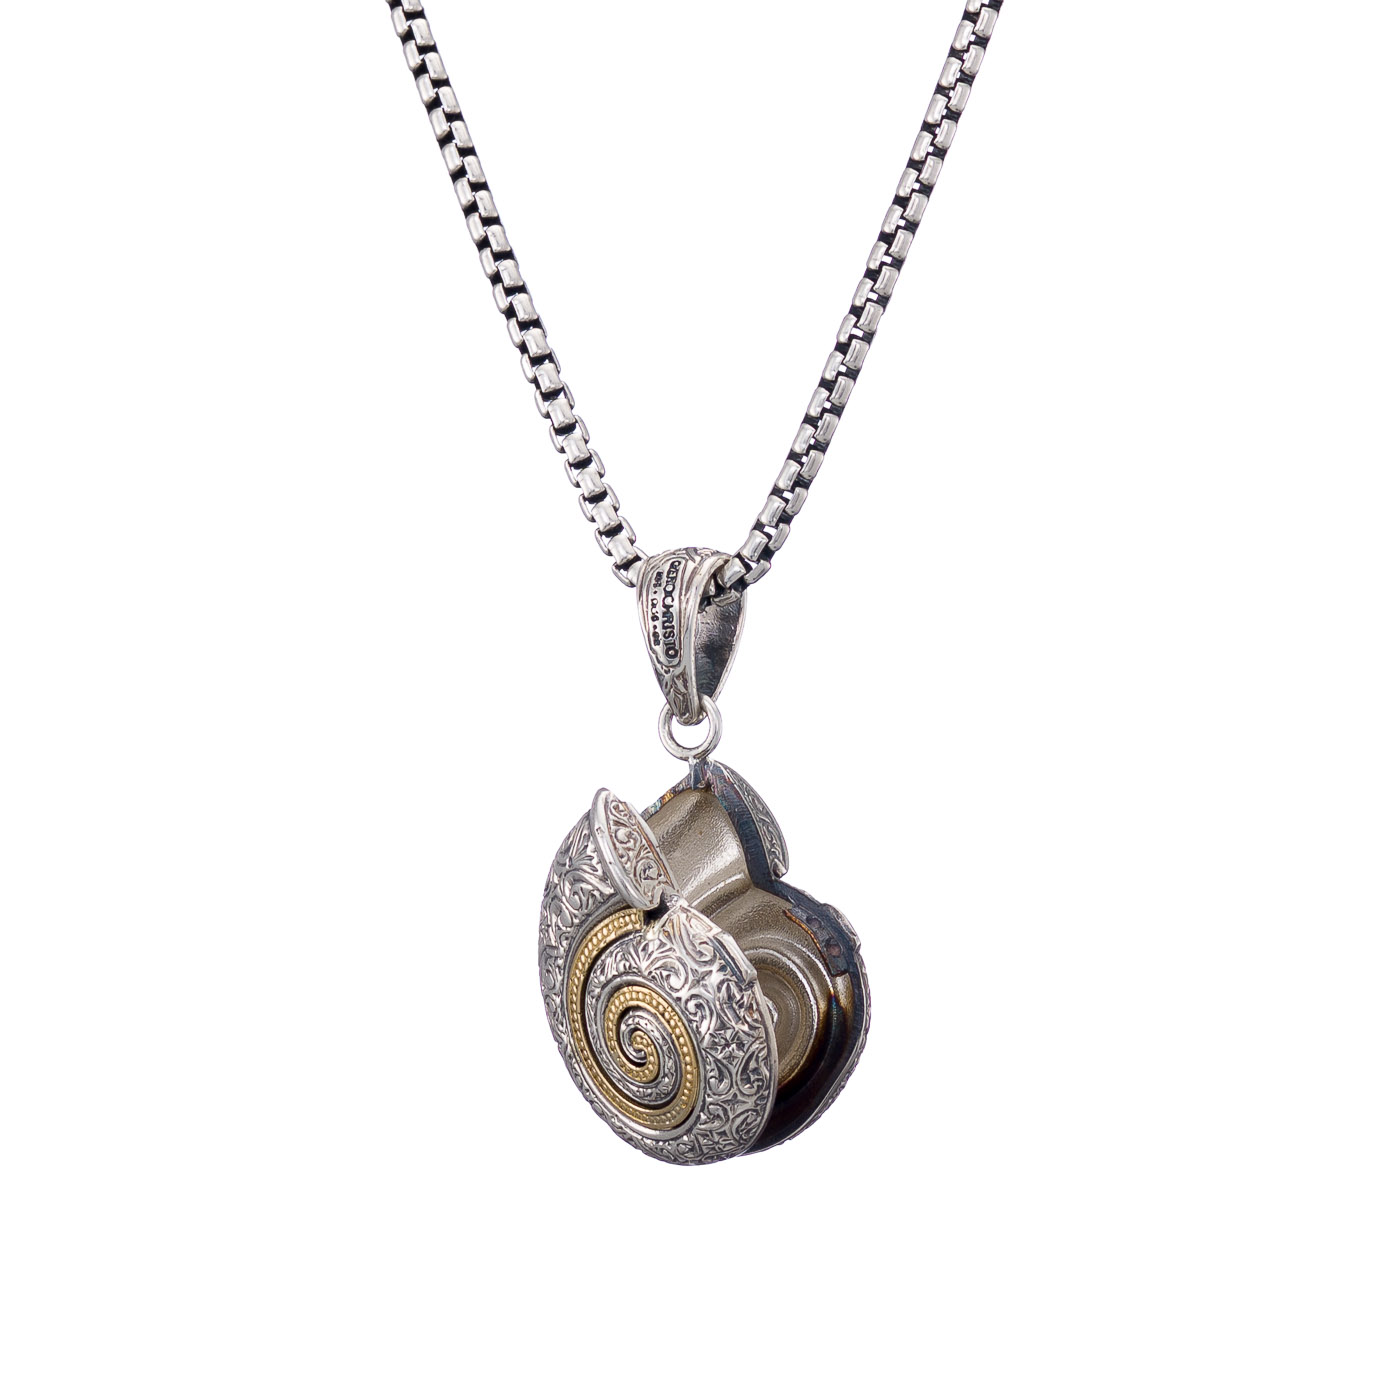 Sea Snail Locket Pendant in 18K Gold and Sterling Silver